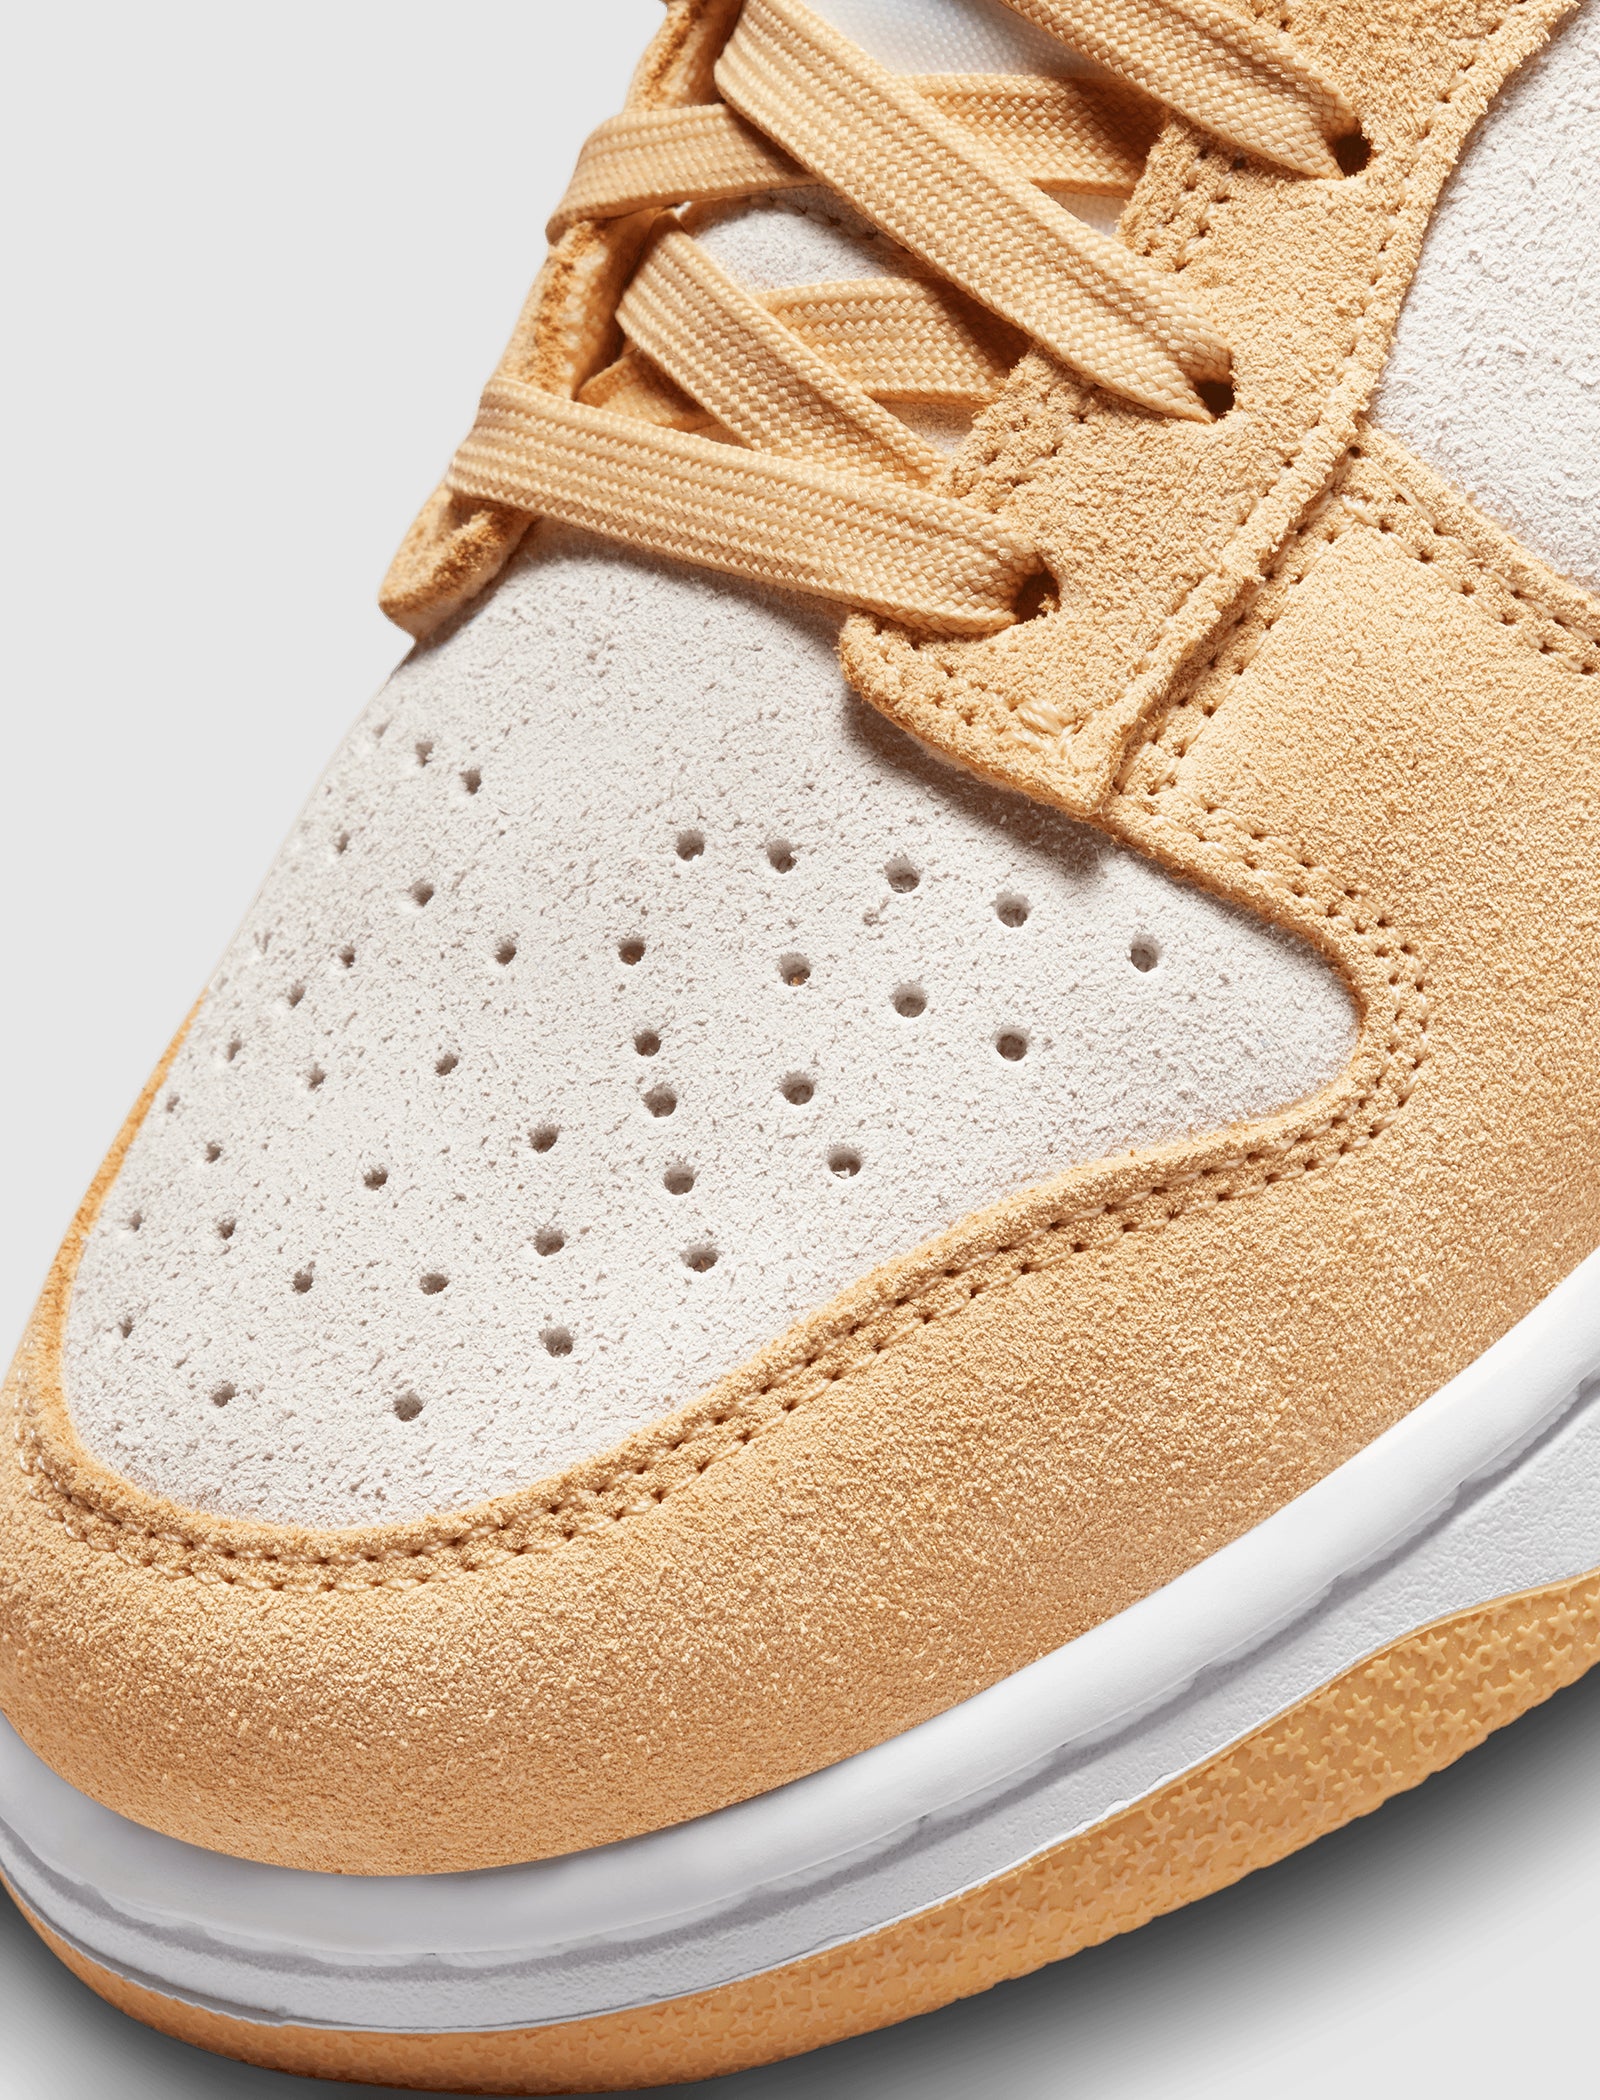 WOMEN'S DUNK LOW LX "GOLD SUEDE"